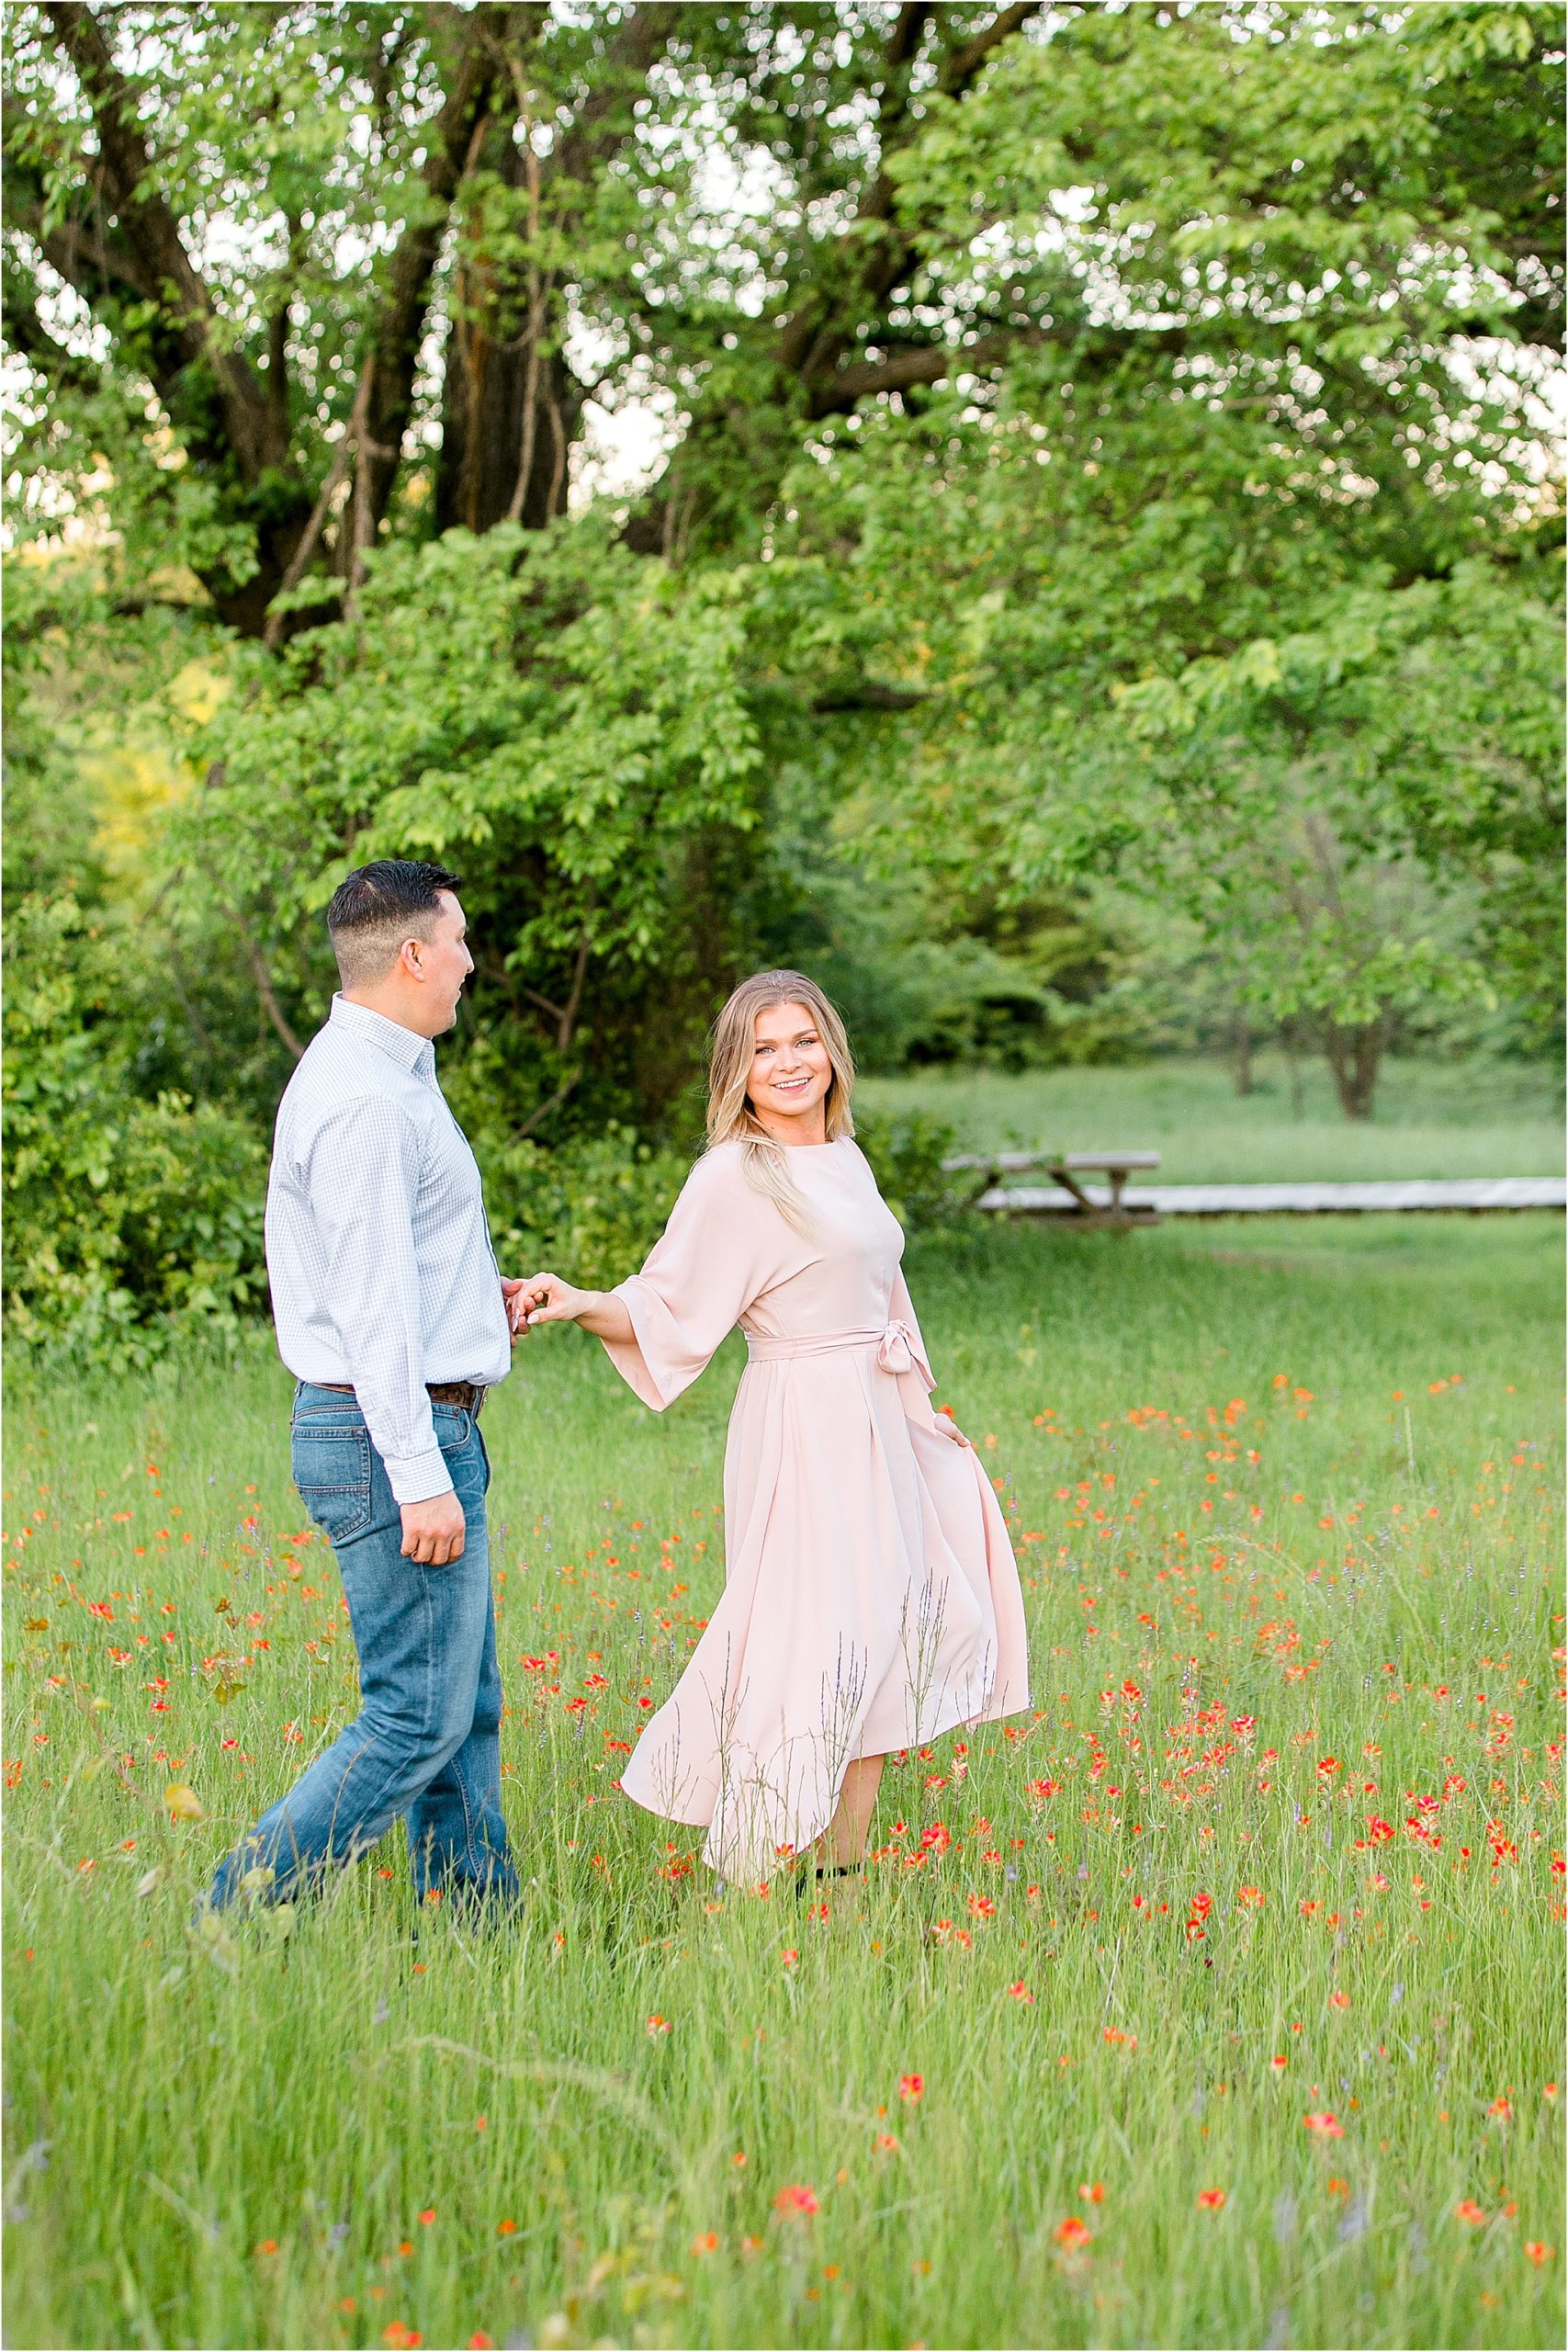 A bride to be holding hands with her fiance and leading him through a lush field for their engagement session in Fort Worth, Texas